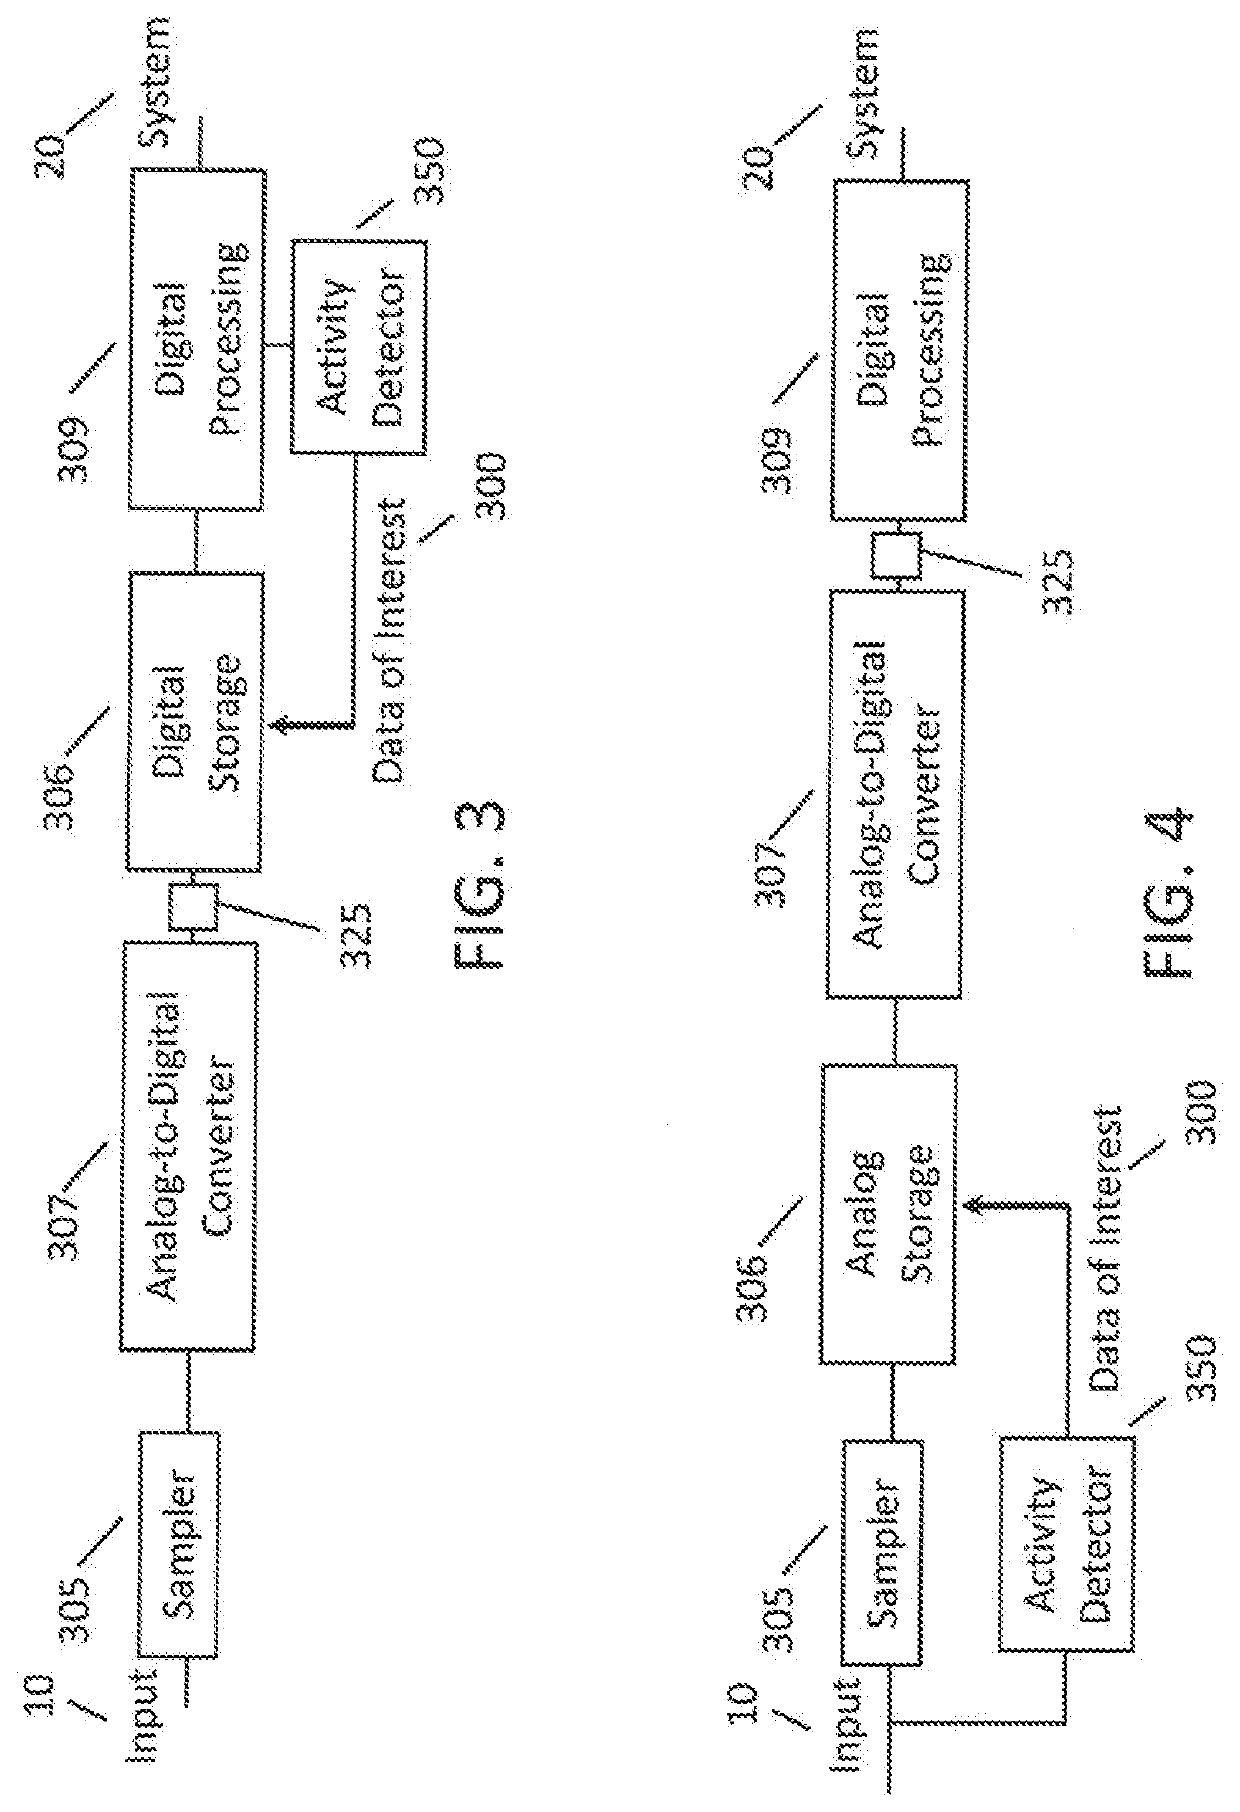 System and method for high-sample rate transient data acquisition with pre-conversion activity detection